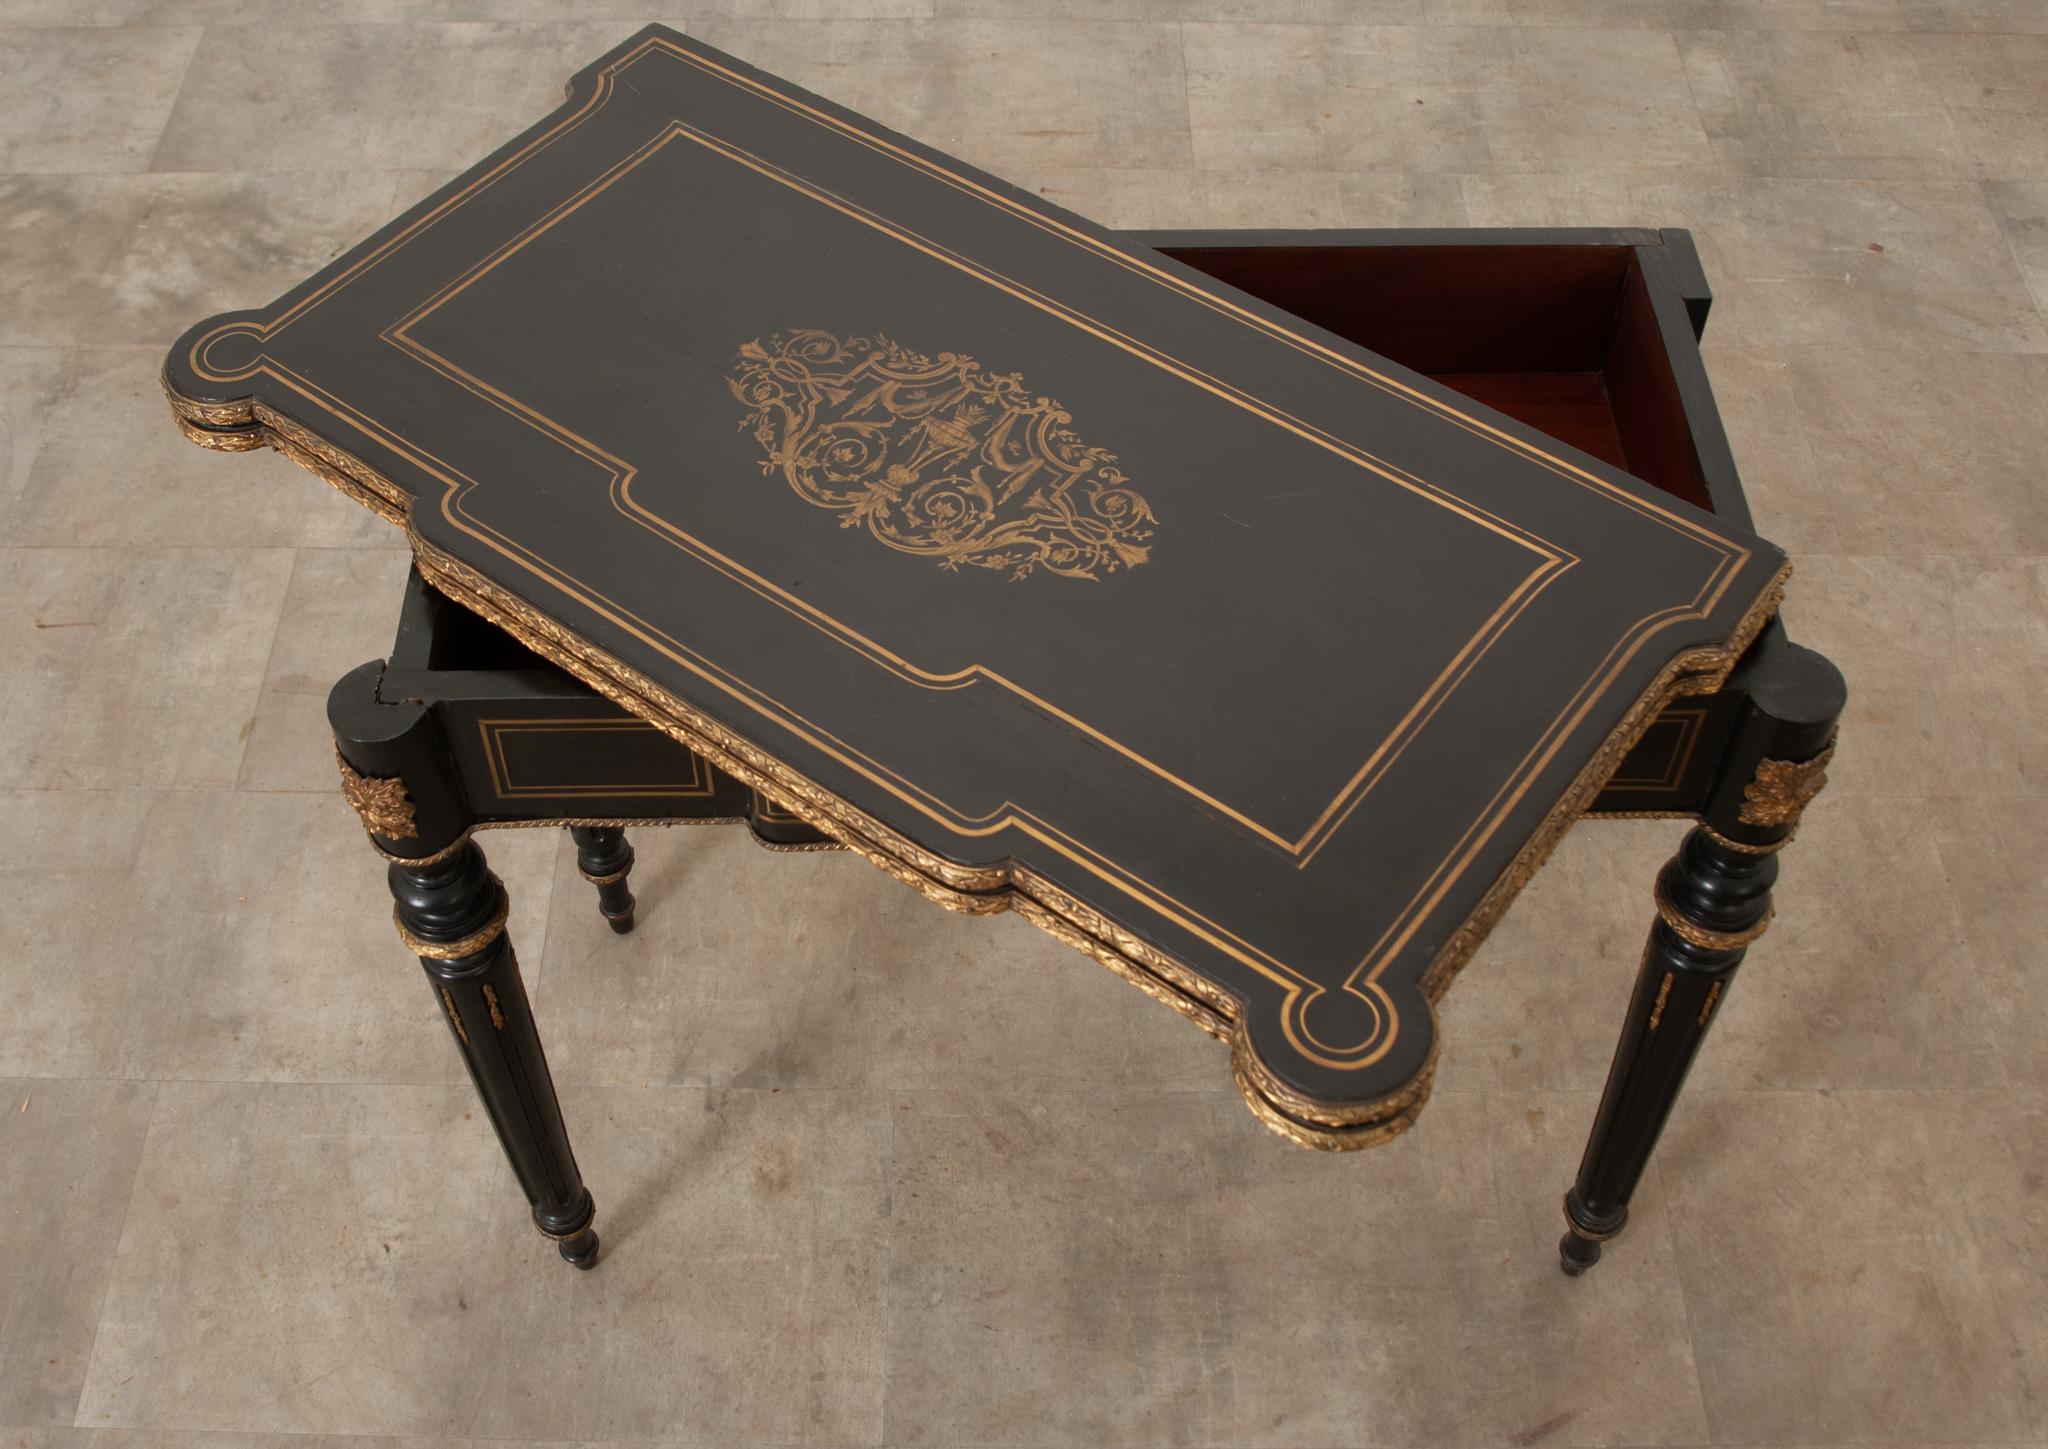 This Louis XVI Style ebonized game table / console is smart and sure to elevate your interior. As a console this table boosts a lot of characters. The center cartouche on the table's surface is full of intricate details surrounded by layers of brass